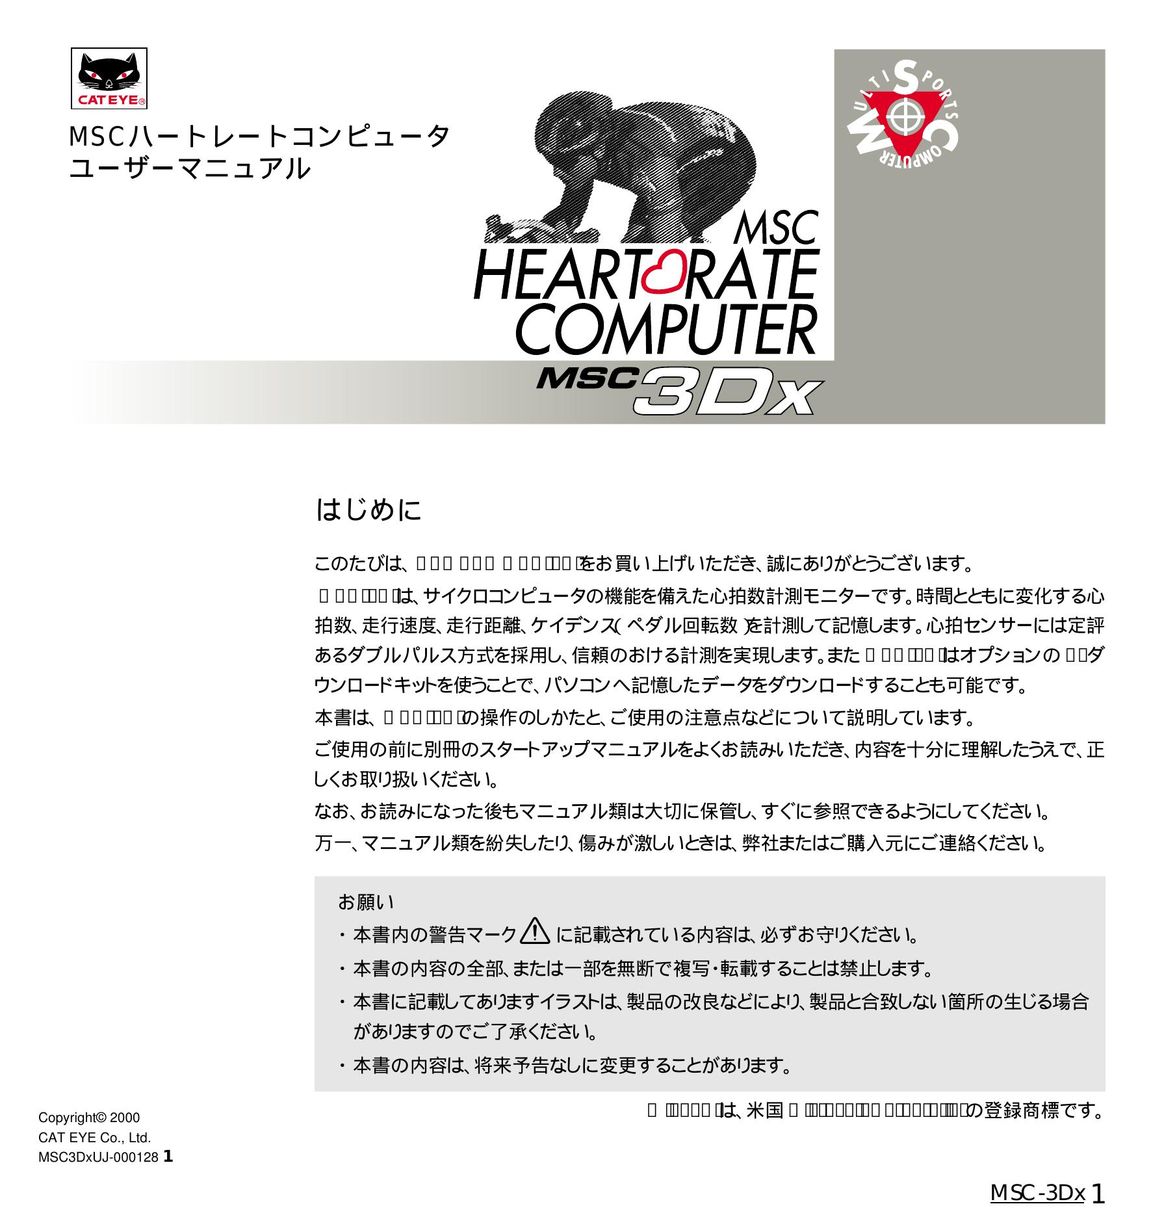 Cateye 3Dx Heart Rate Monitor User Manual